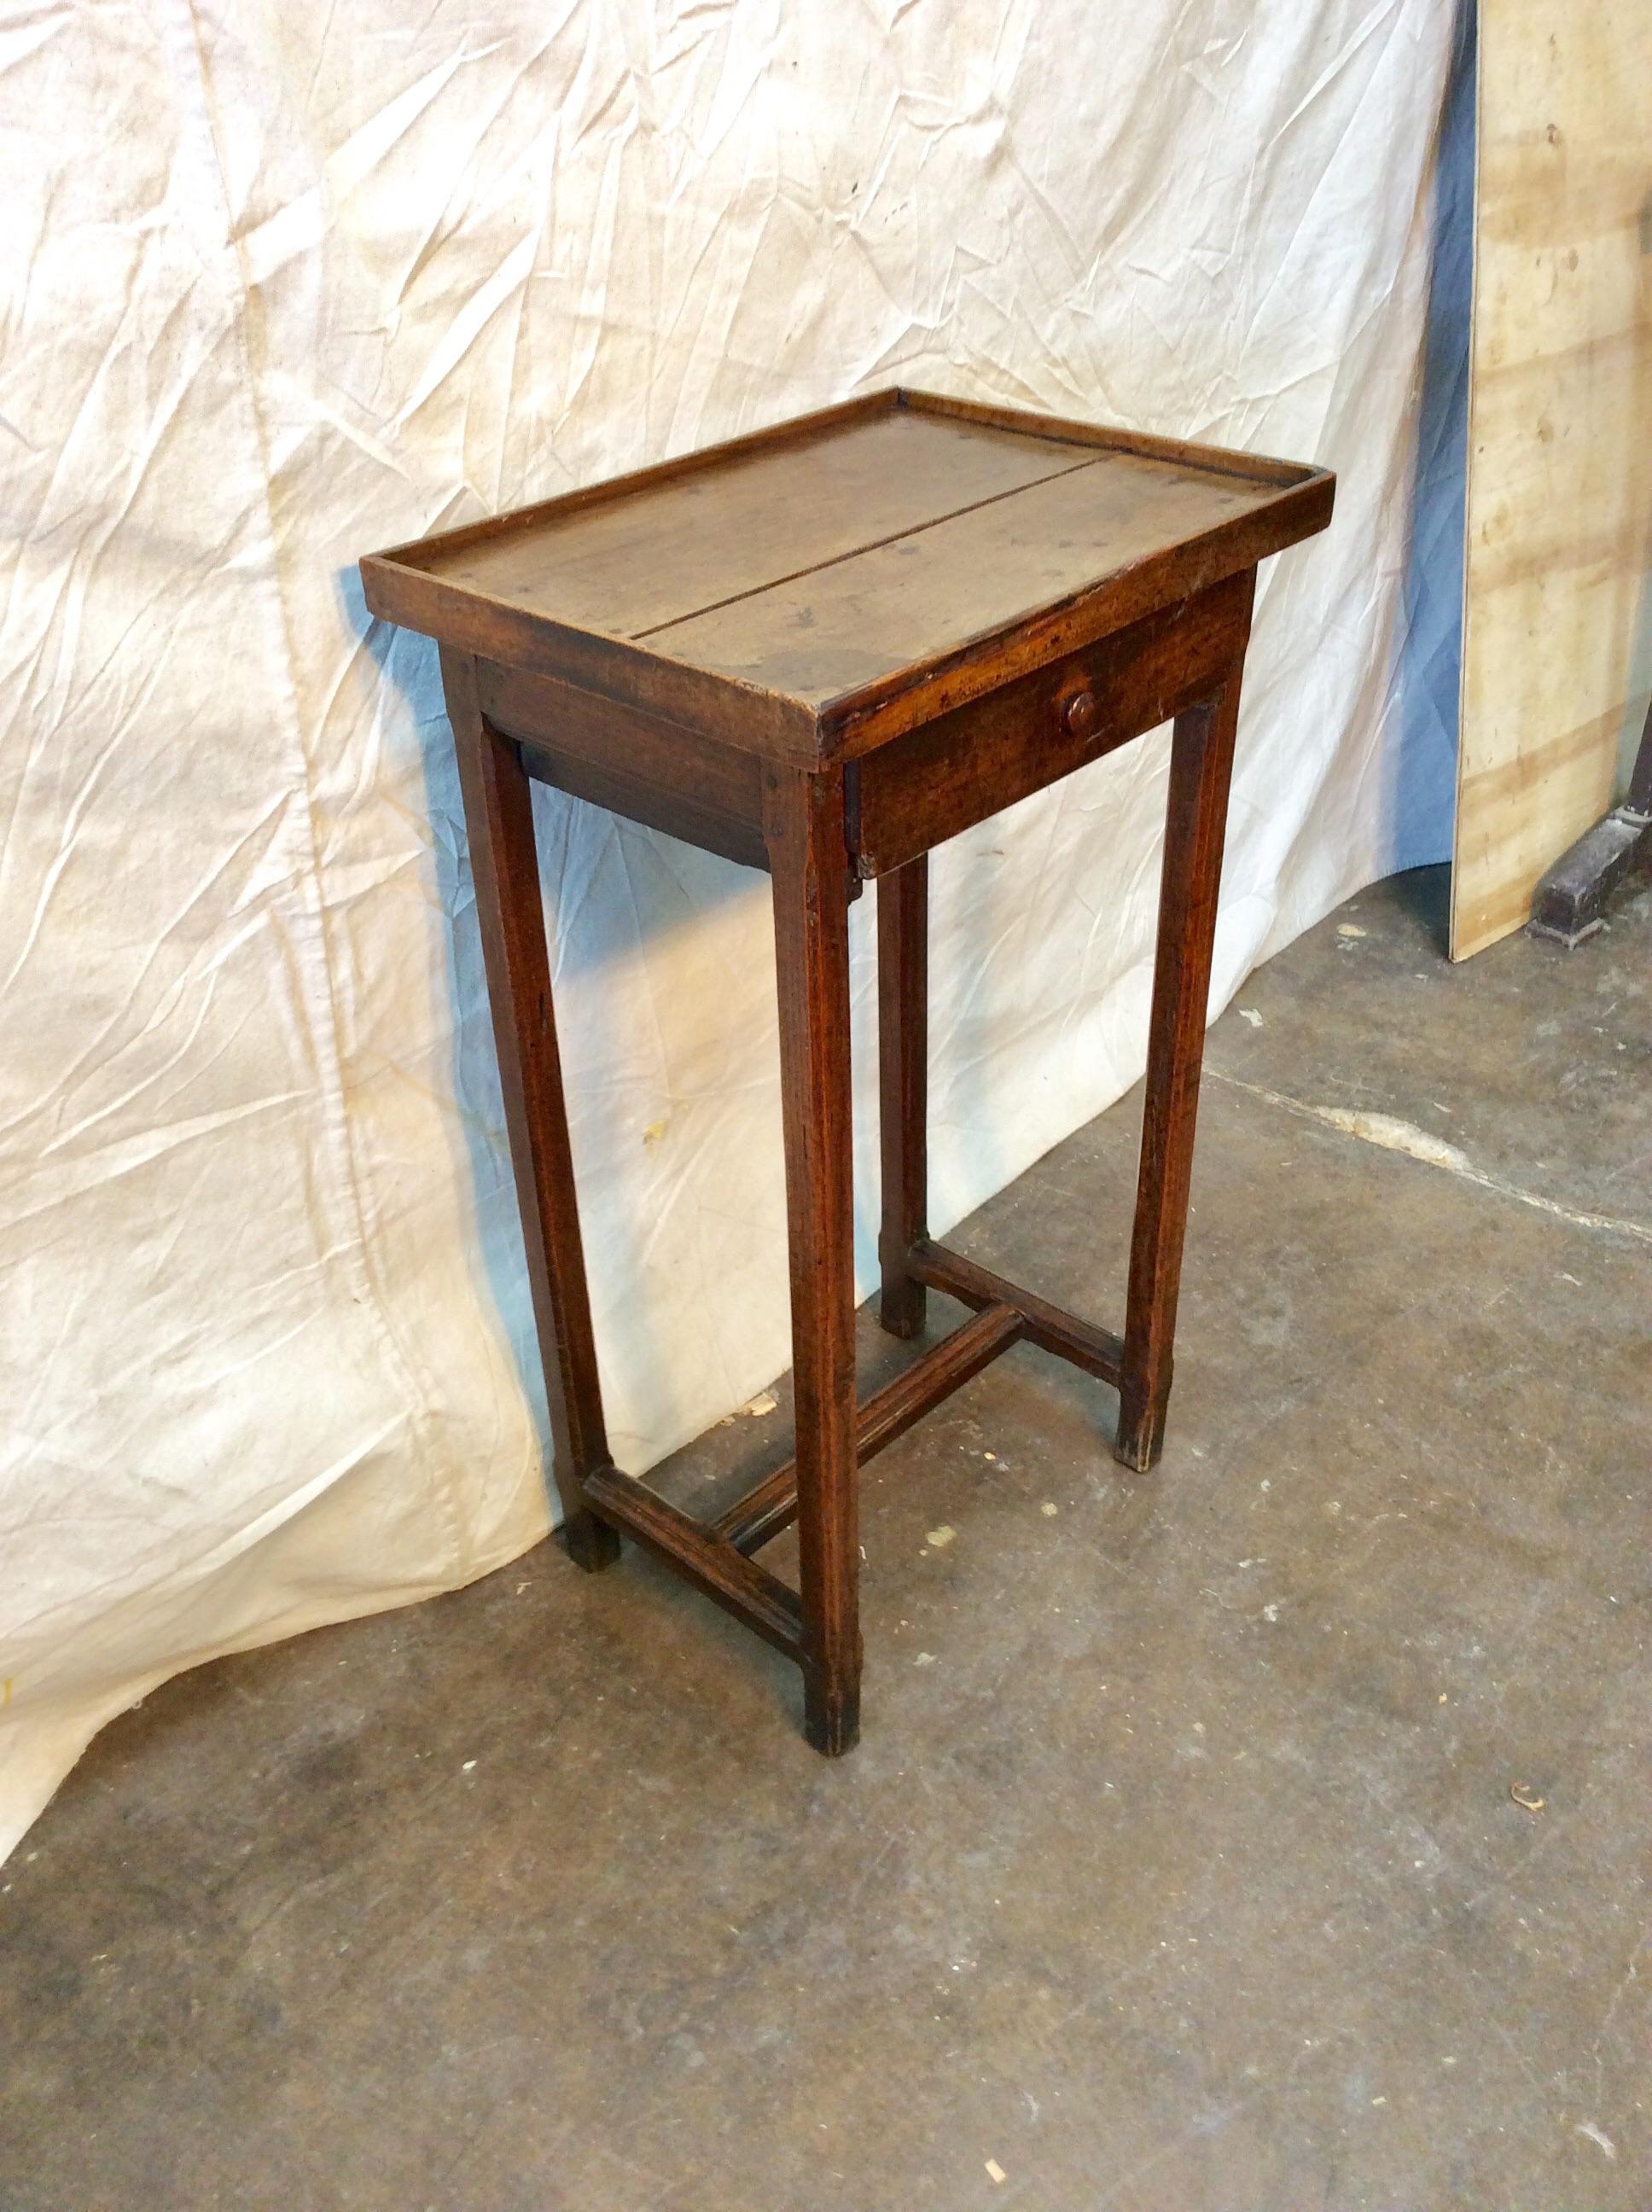 From the late 1800s, this French side table offers a sturdy surface and one drawer. It could be used as a drinks table or a small nightstand.

17.25